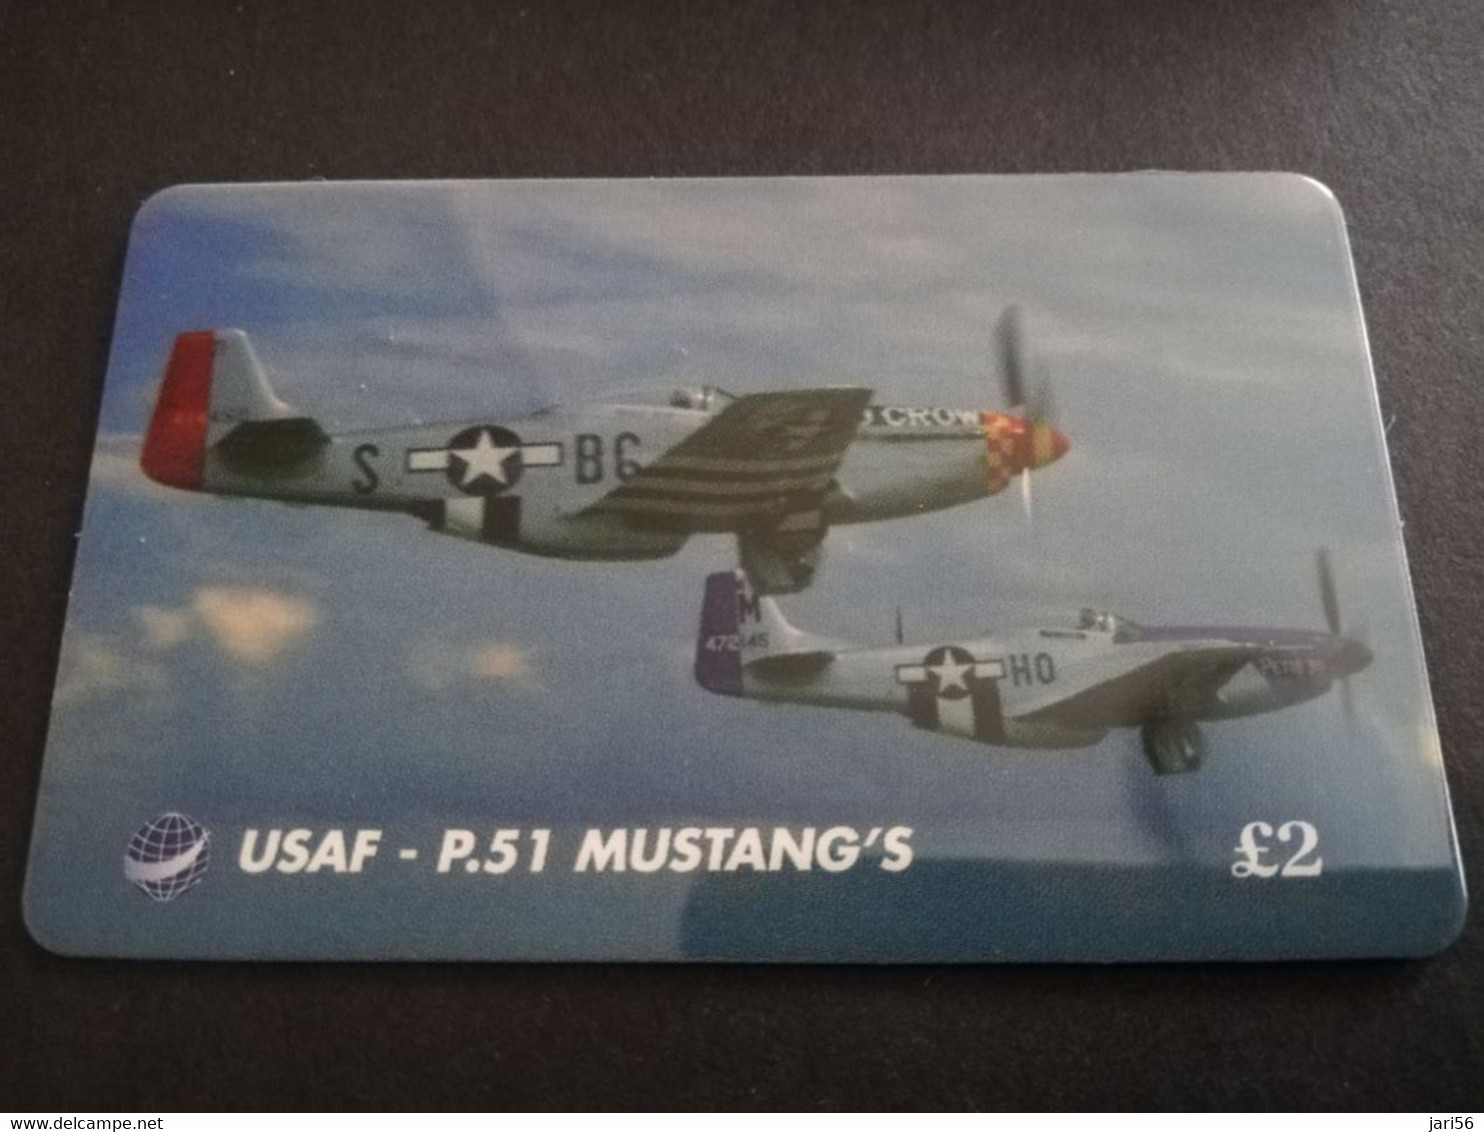 GREAT BRITAIN   2 POUND  AIR PLANES    USAF-P.51 MUSTANG'S   PREPAID CARD      **5447** - Verzamelingen